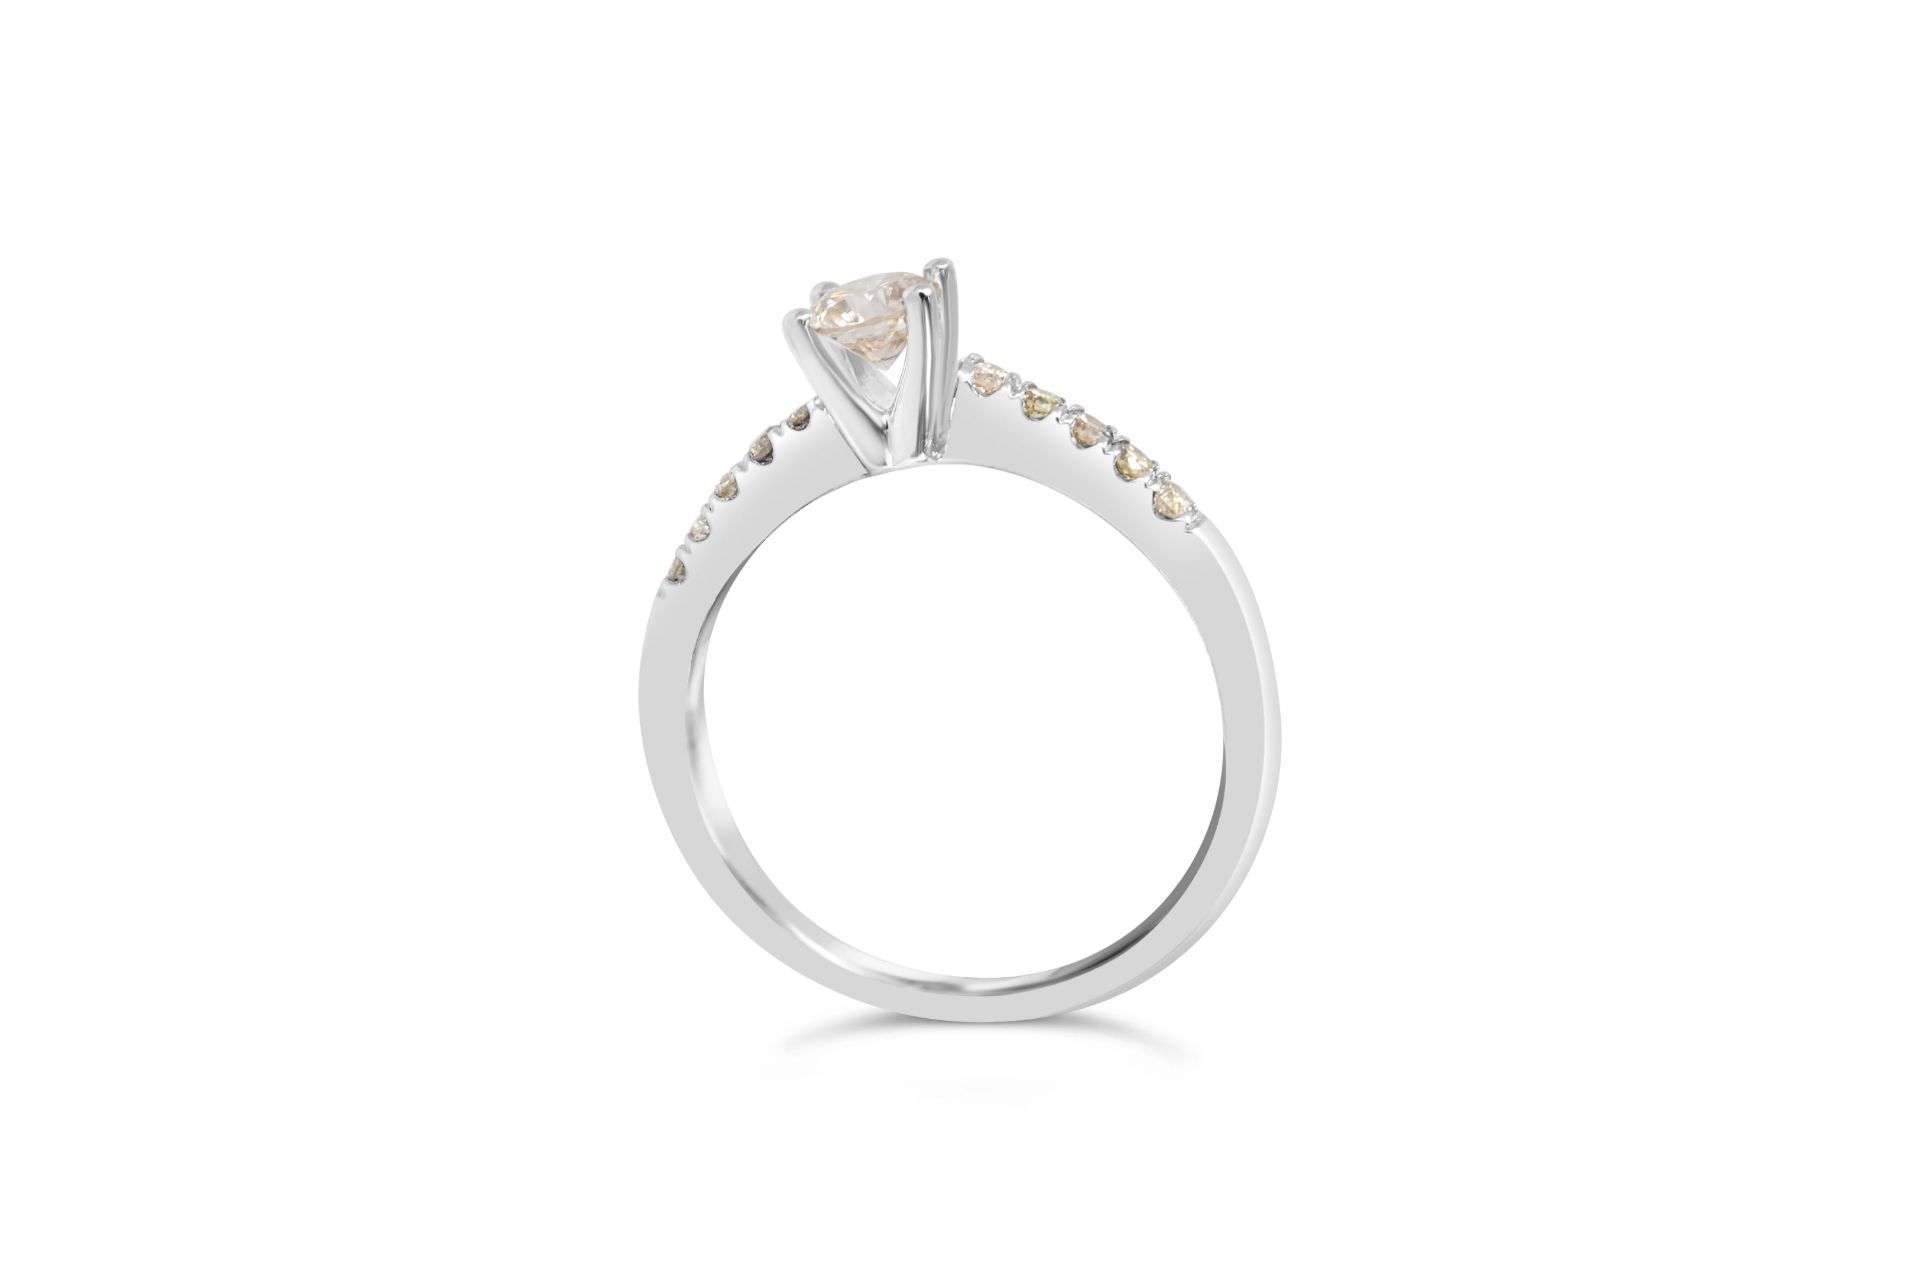 Solitaire diamond ring with diamonds on shoulder - Image 2 of 3